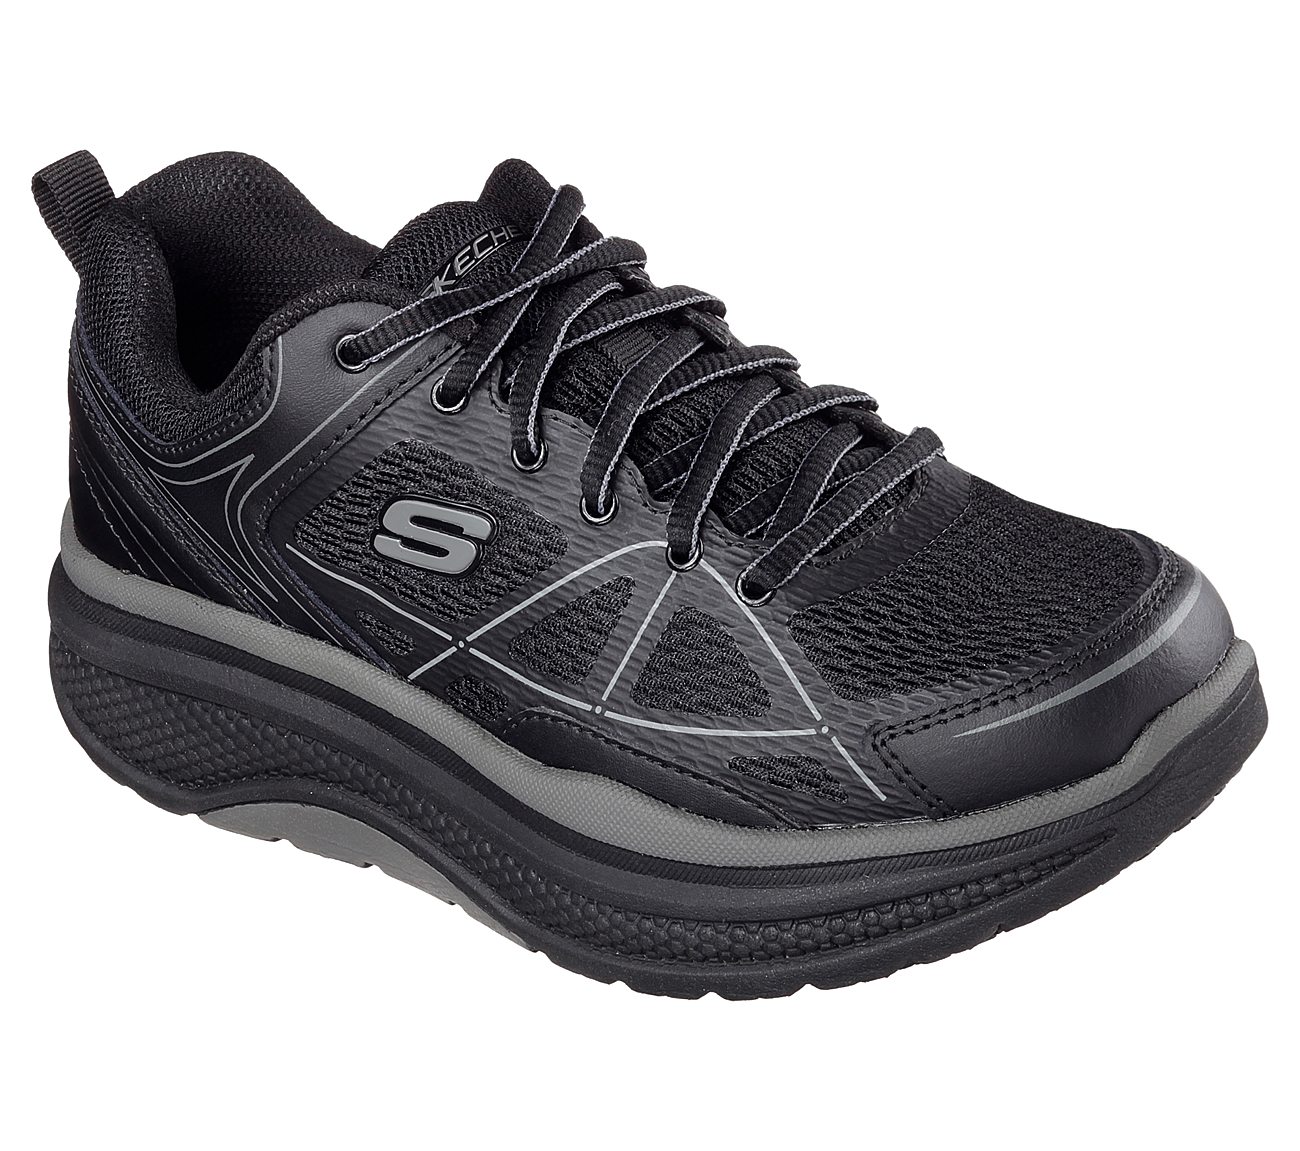 Buy SKECHERS Work Relaxed Fit: Cheriton SR Work Shoes